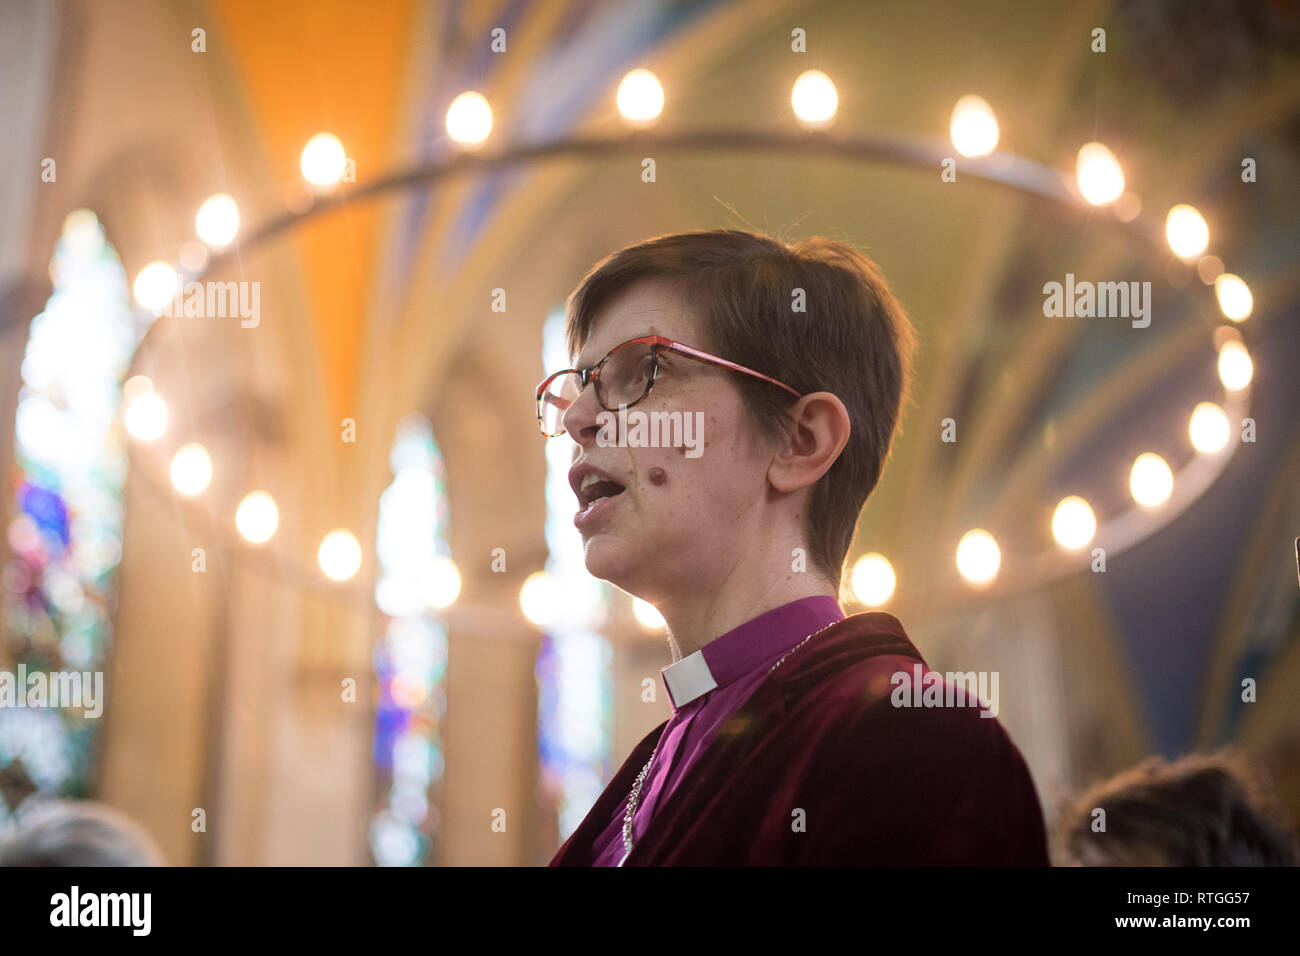 Bishop of Derby Right Reverend Libby Lane sings at a service of celebration to mark the 25th anniversary of the ordination of women to the priesthood in the Church of England, at Lambeth Palace, London. Stock Photo